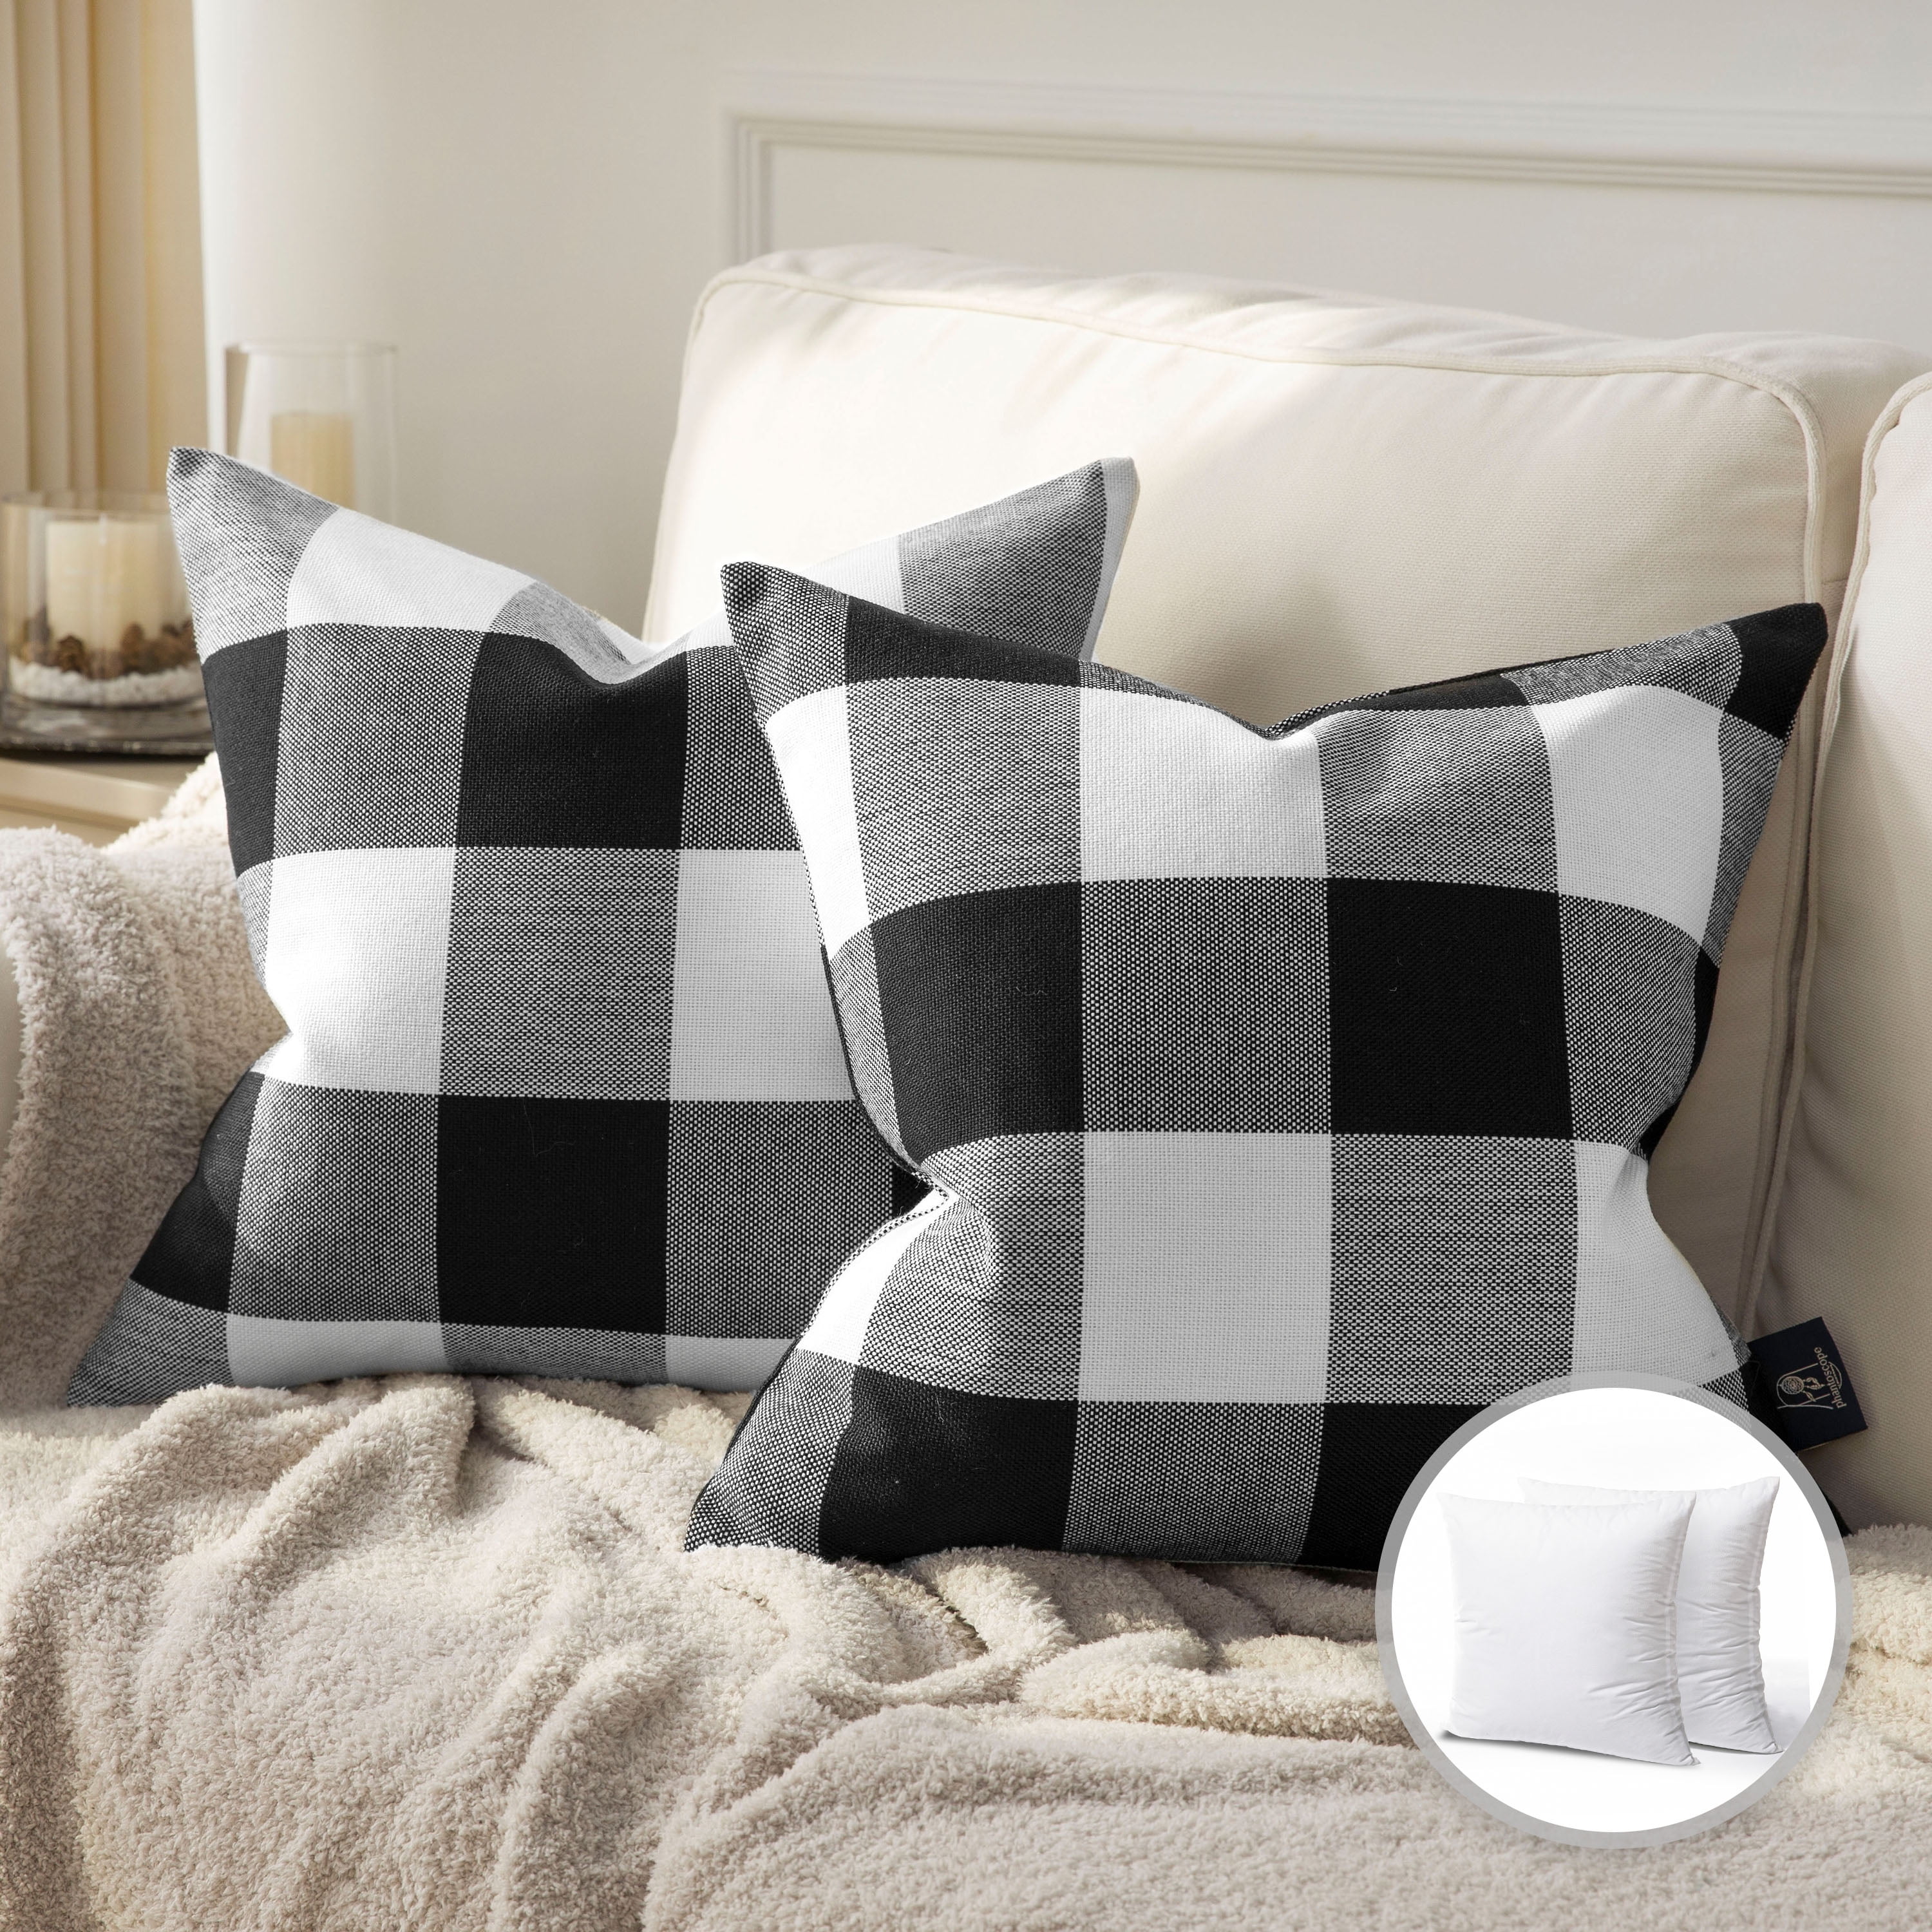 Phantoscope 18 x 18 Outdoor Pillow Inserts - Pack of 4 Square Form Water Resistant Decorative Throw Pillows, Made in USA, White